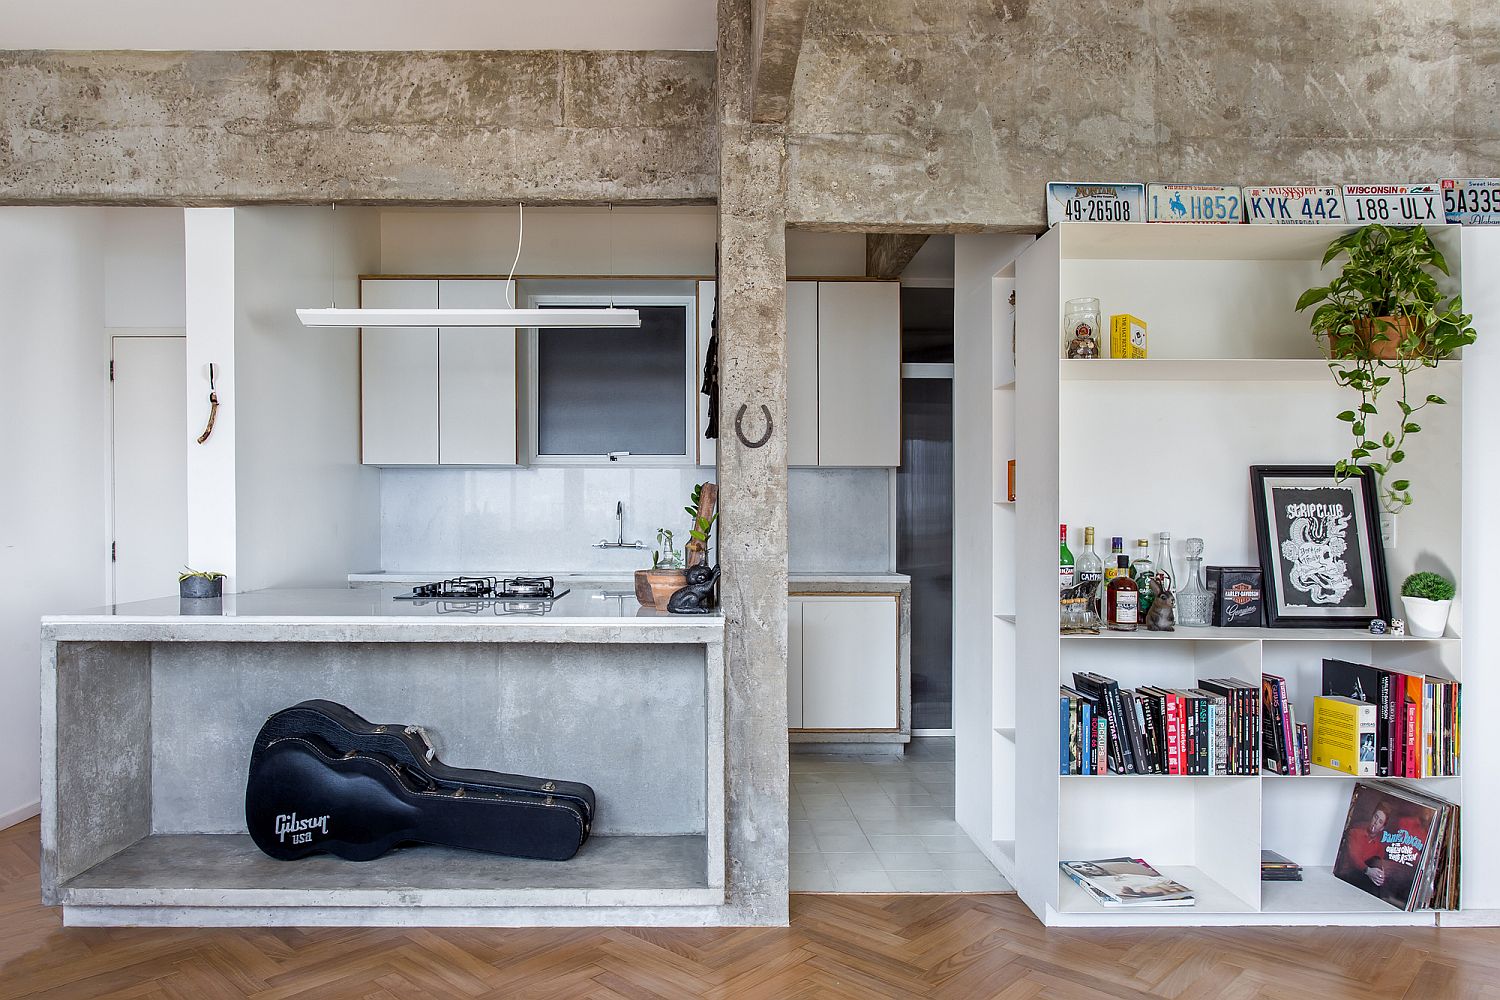 Concrete and wood living area of the modern Brazilian apartment with white shelves